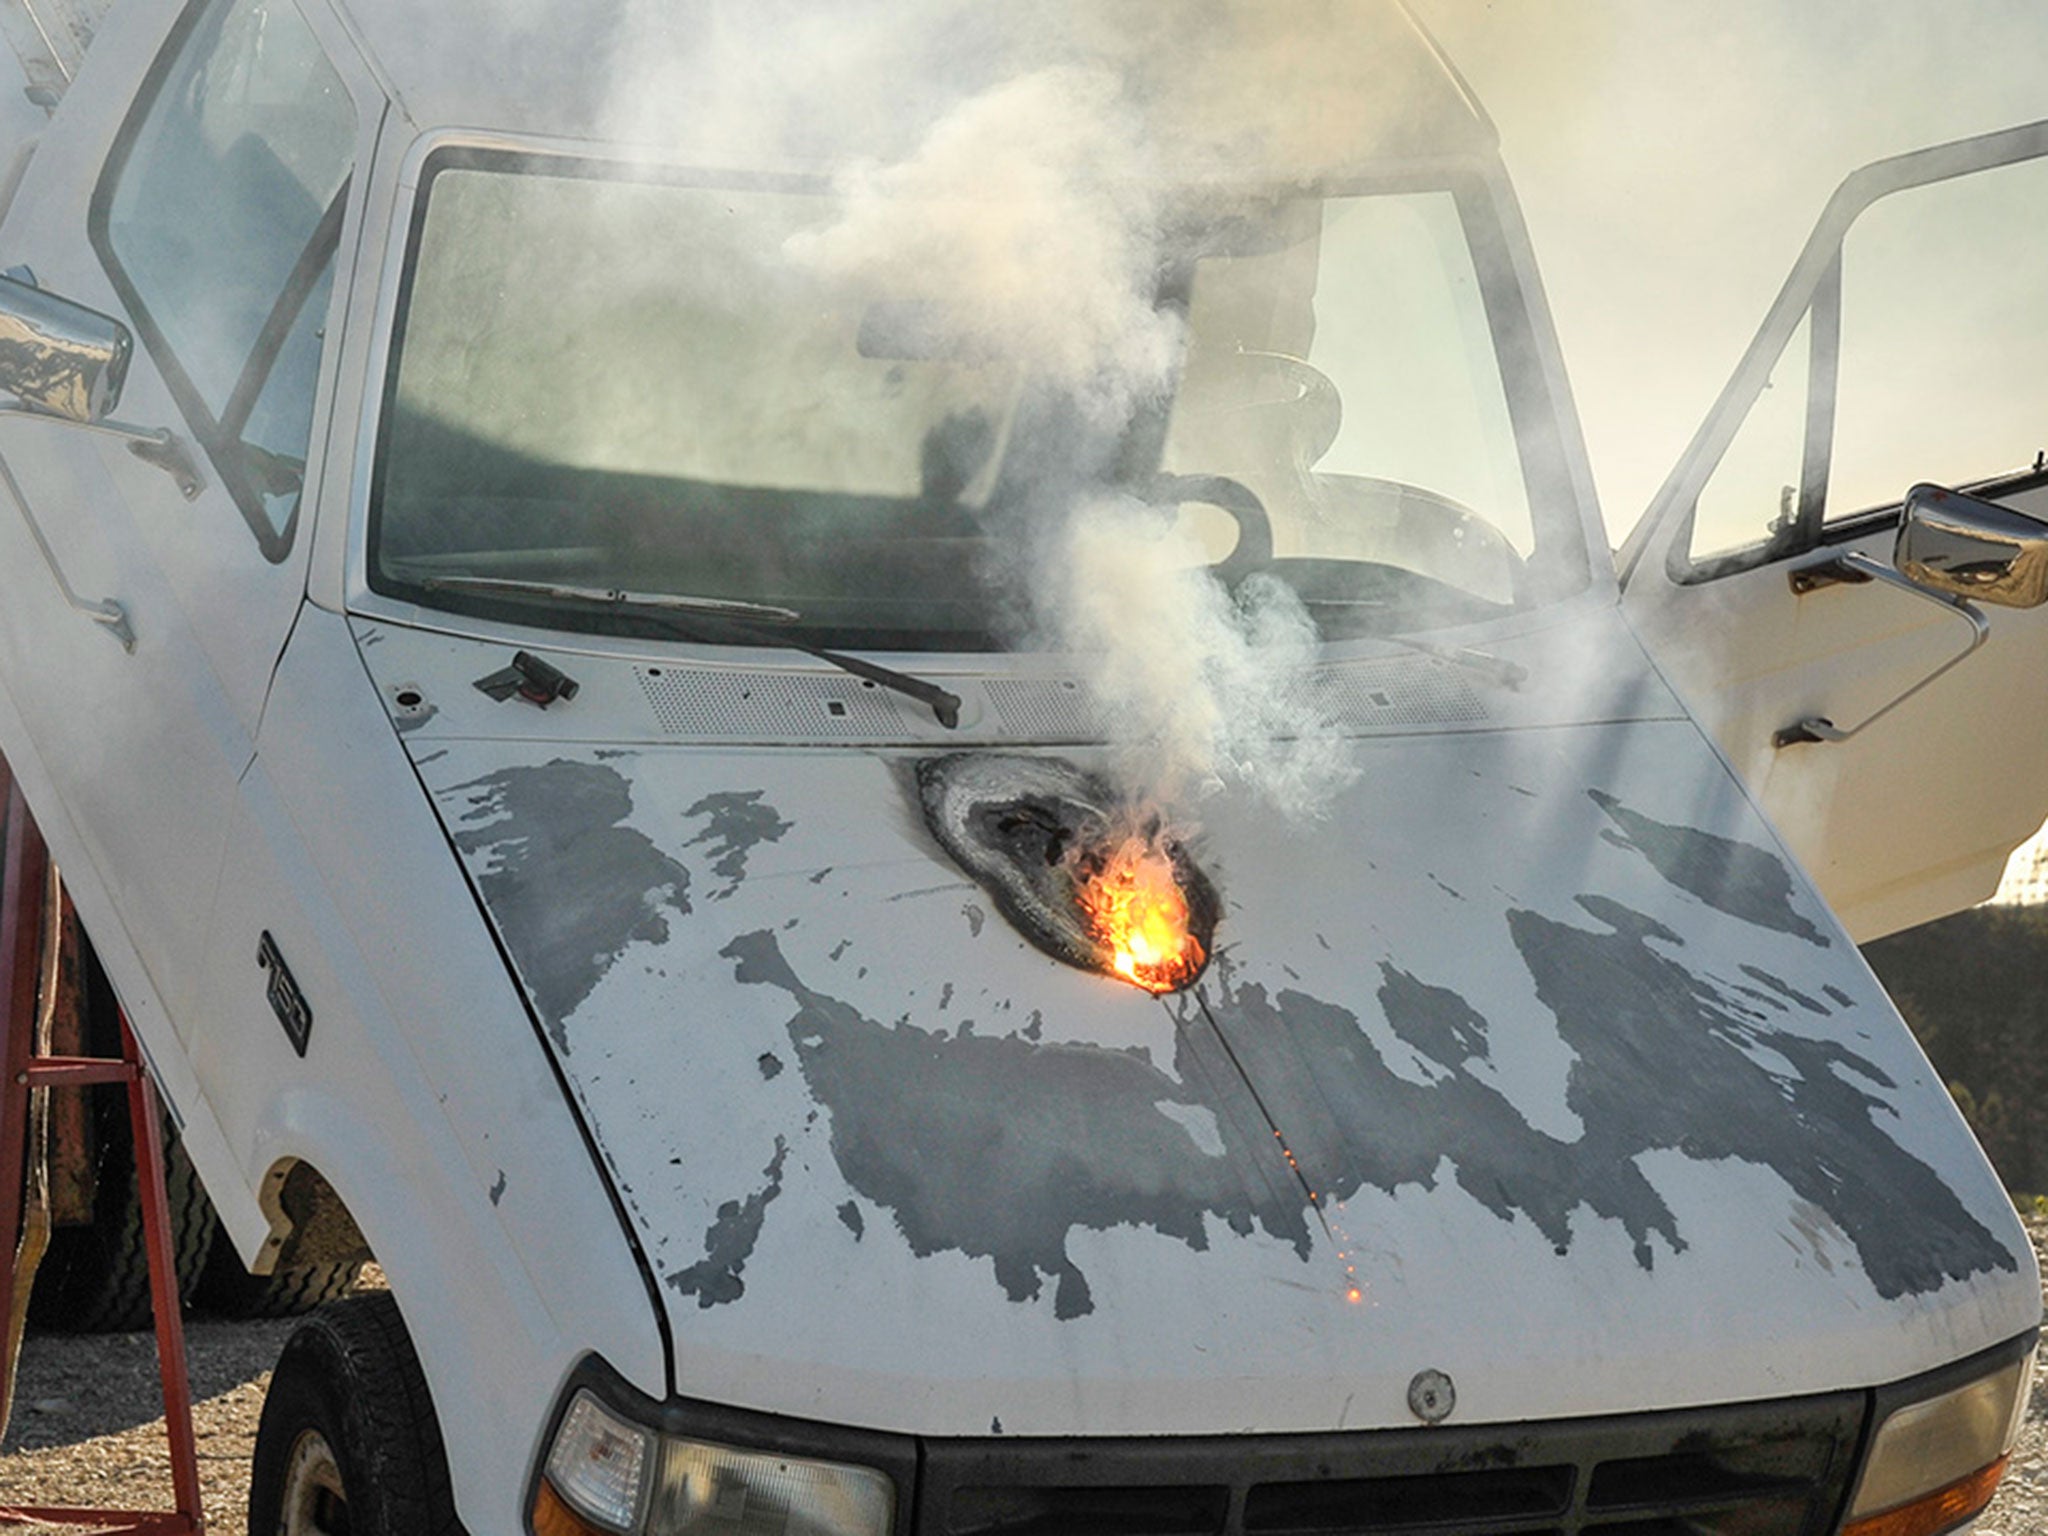 Lockheed Martin ATHENA laser weapon system defeats a truck target by disabling the engine, demonstrating its military effectiveness against enemy ground vehicles.